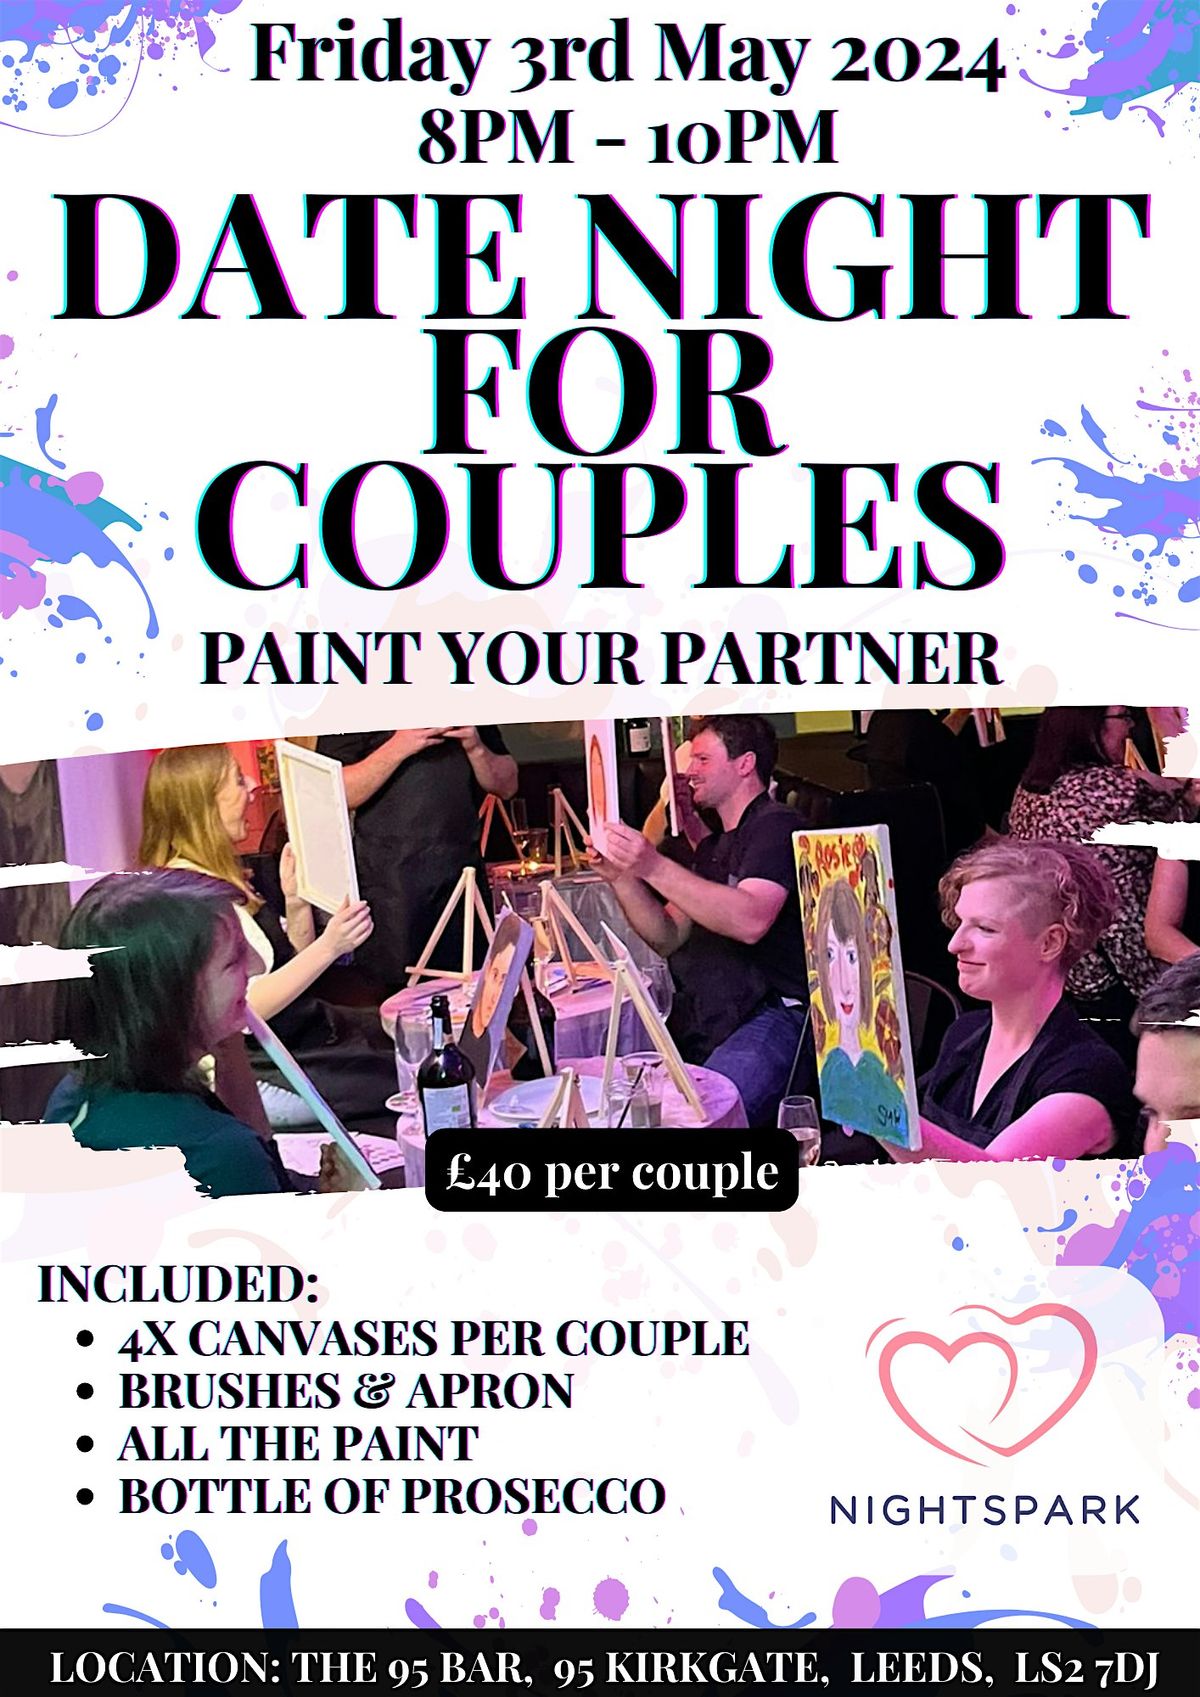 Paint Your Partner - Date Night Event for Couples